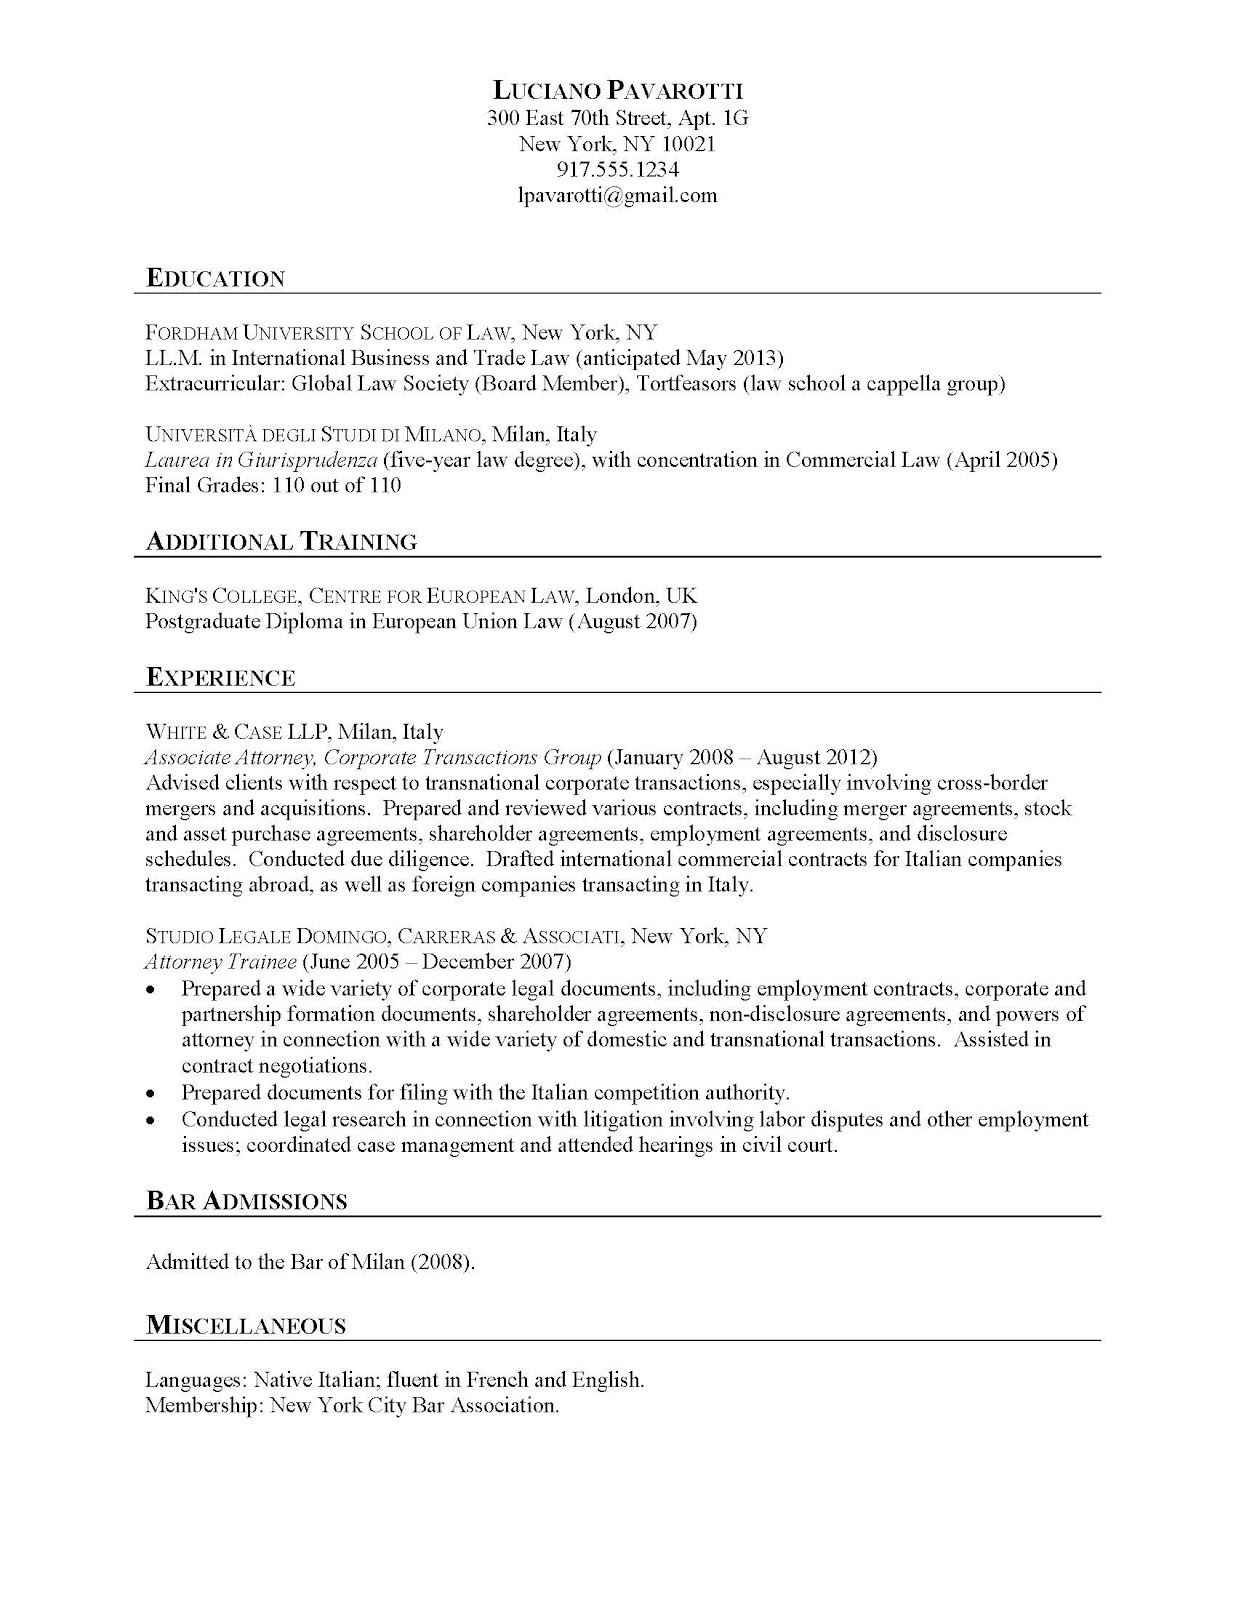 Show a resume examples